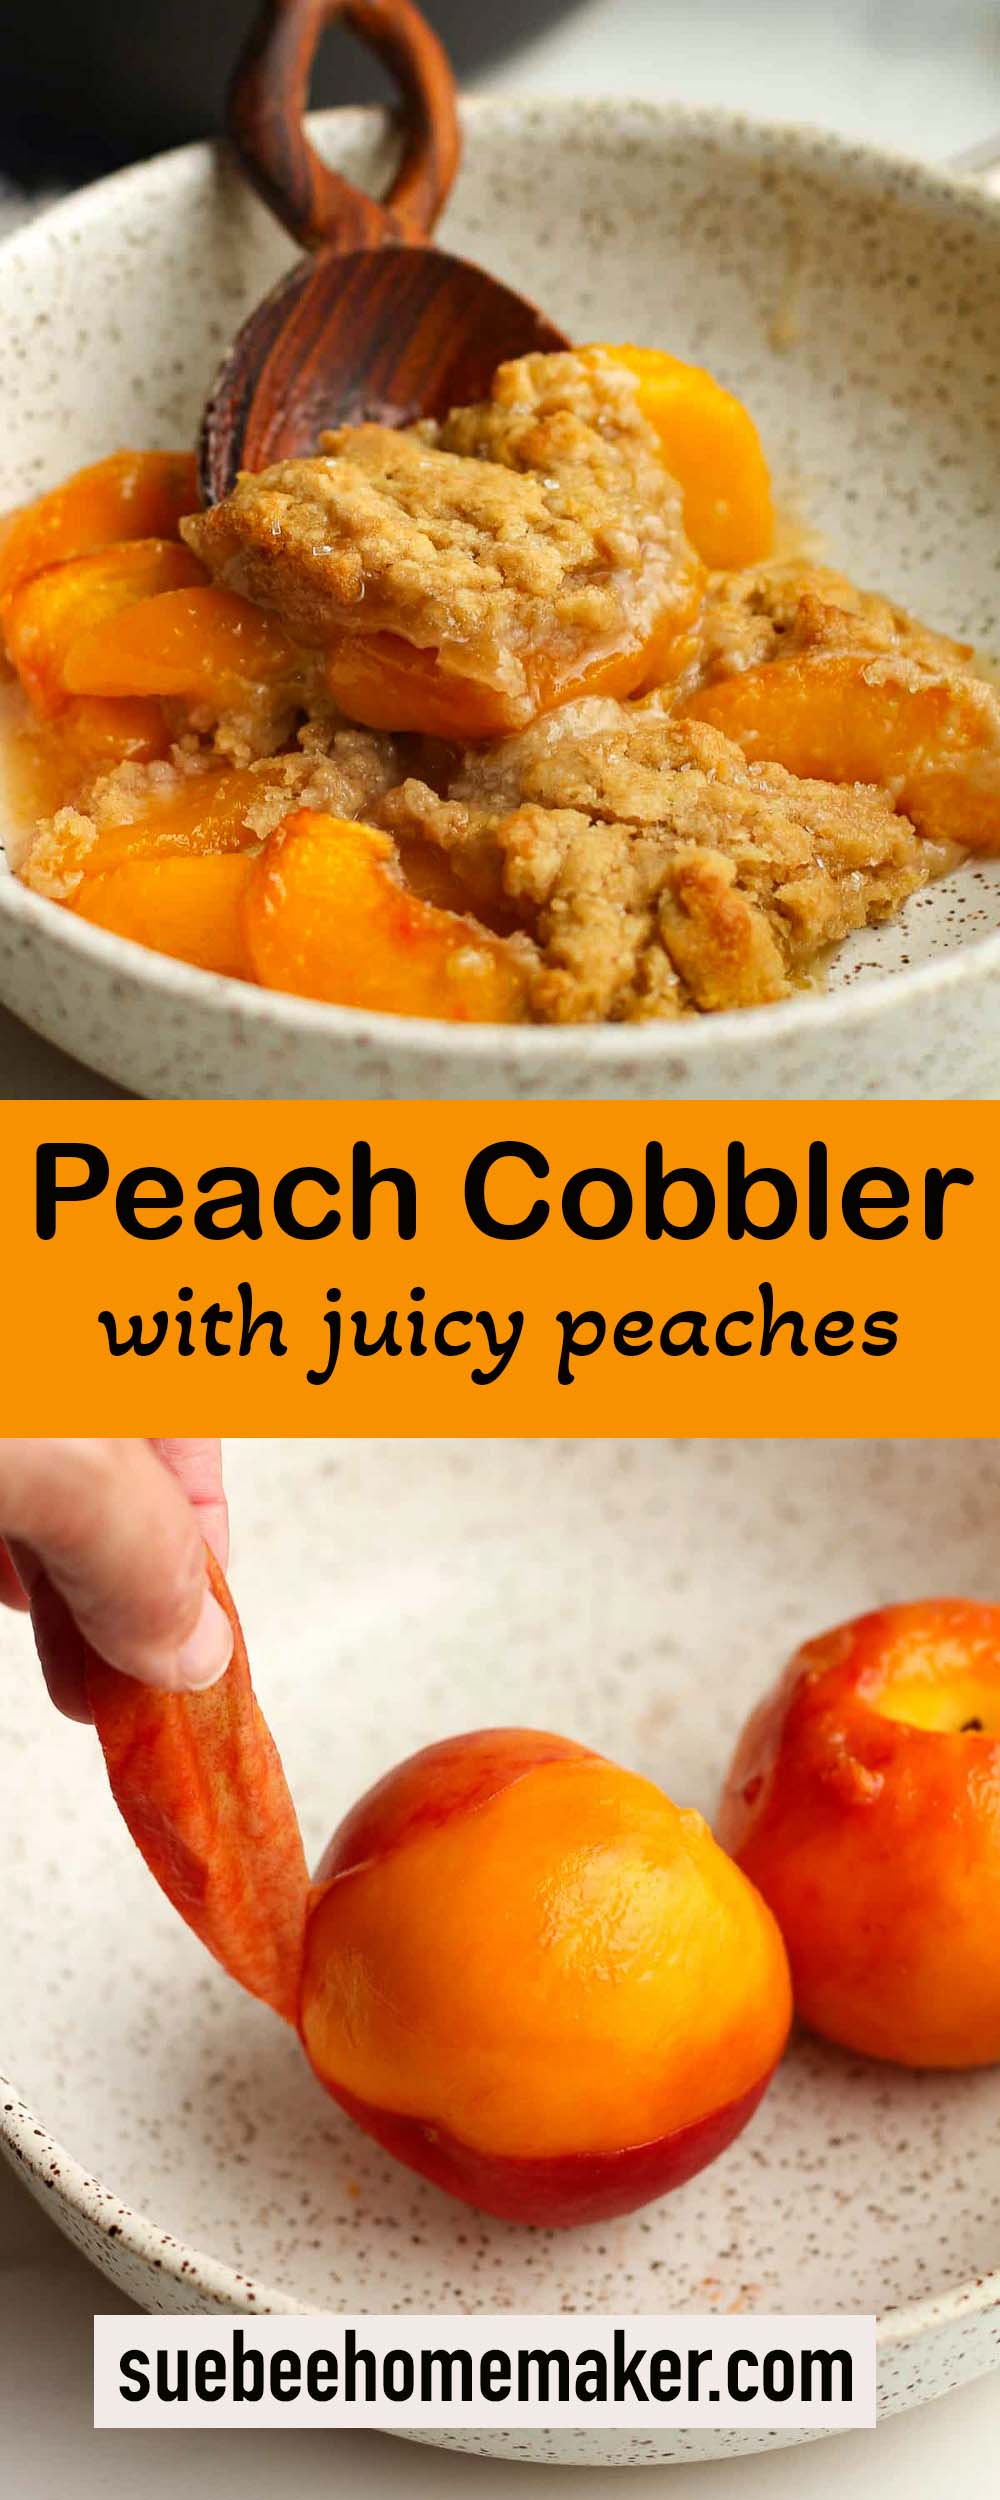 Two photos for Peach Cobbler with juicy peaches.